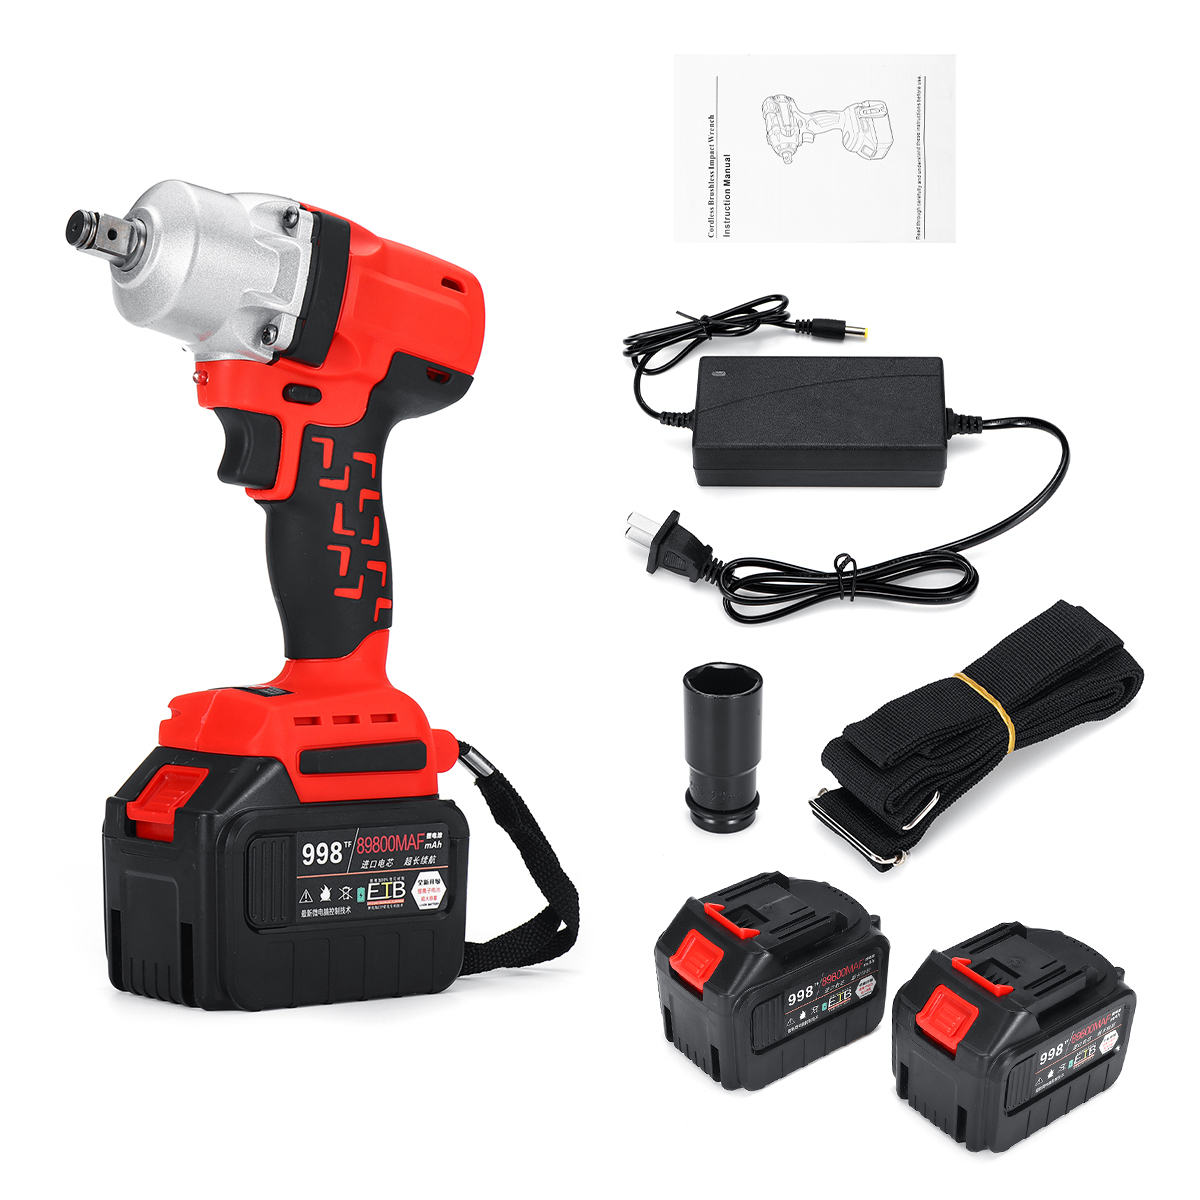 

600Nm 89800mAh 1/2'' Brushless Electric Impact Wrench Power Driver Cordless Torque Tool